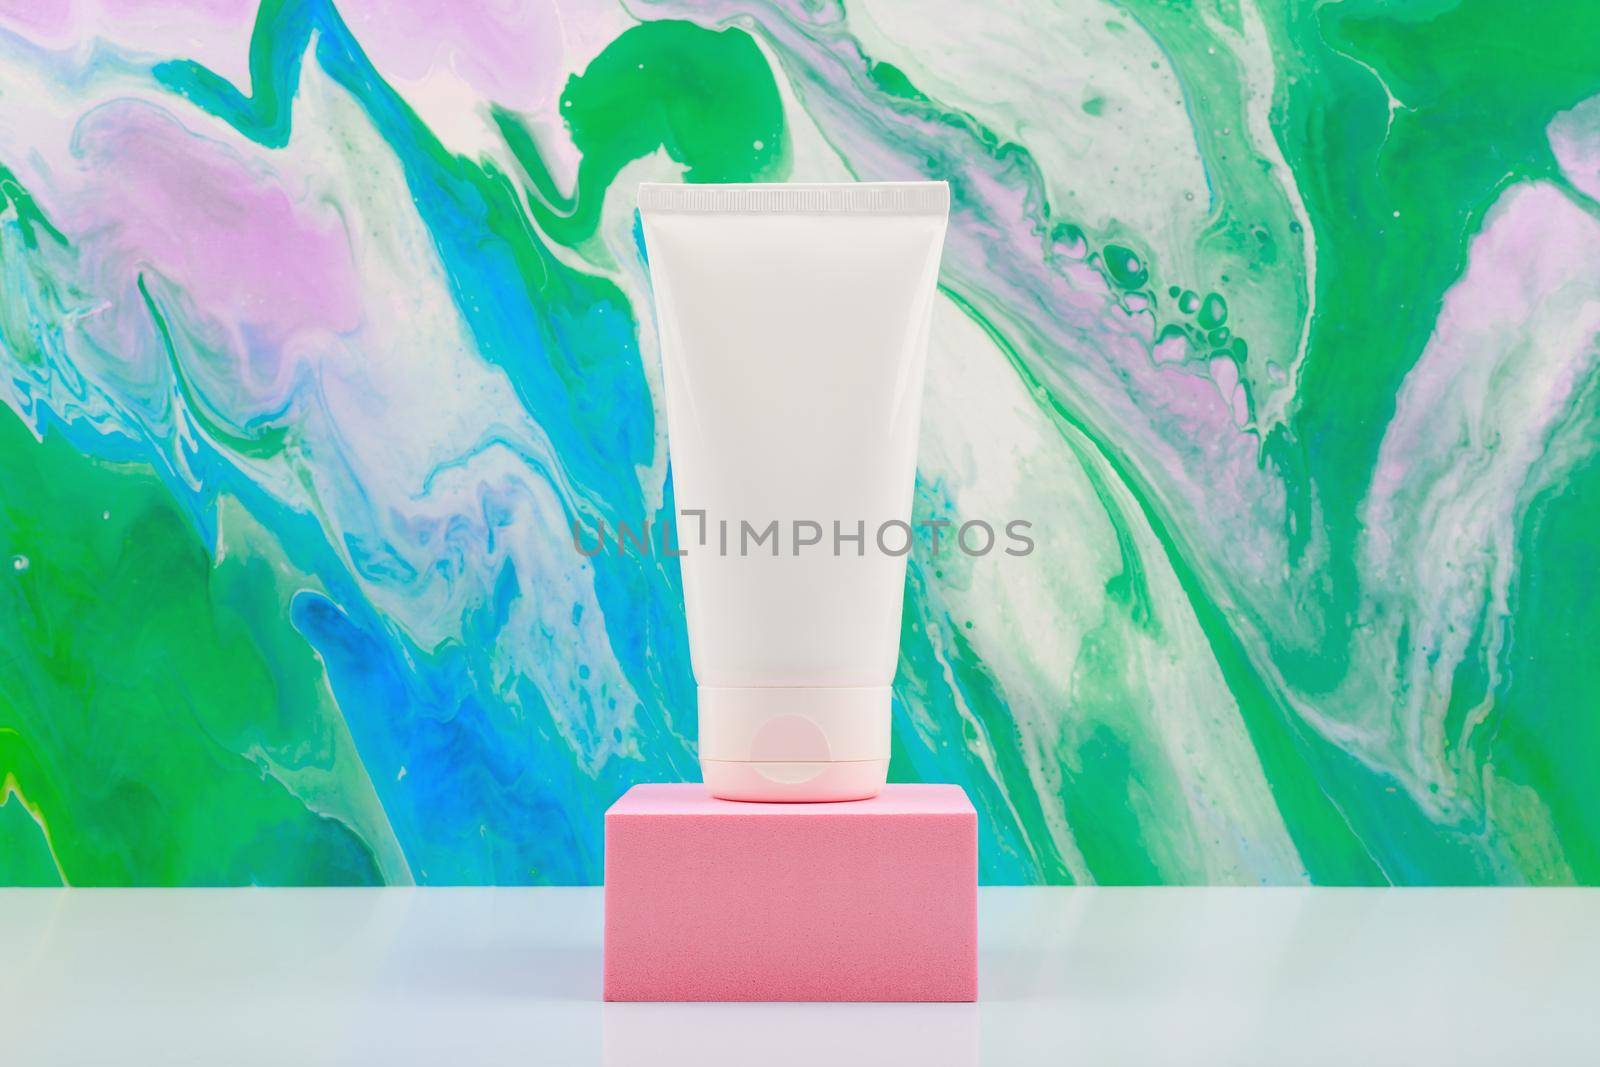 Hands cream in white unbranded tube on pink podium against bright marbled background in green and blue tones. Concept of groomed hands and soft, moisturized skin